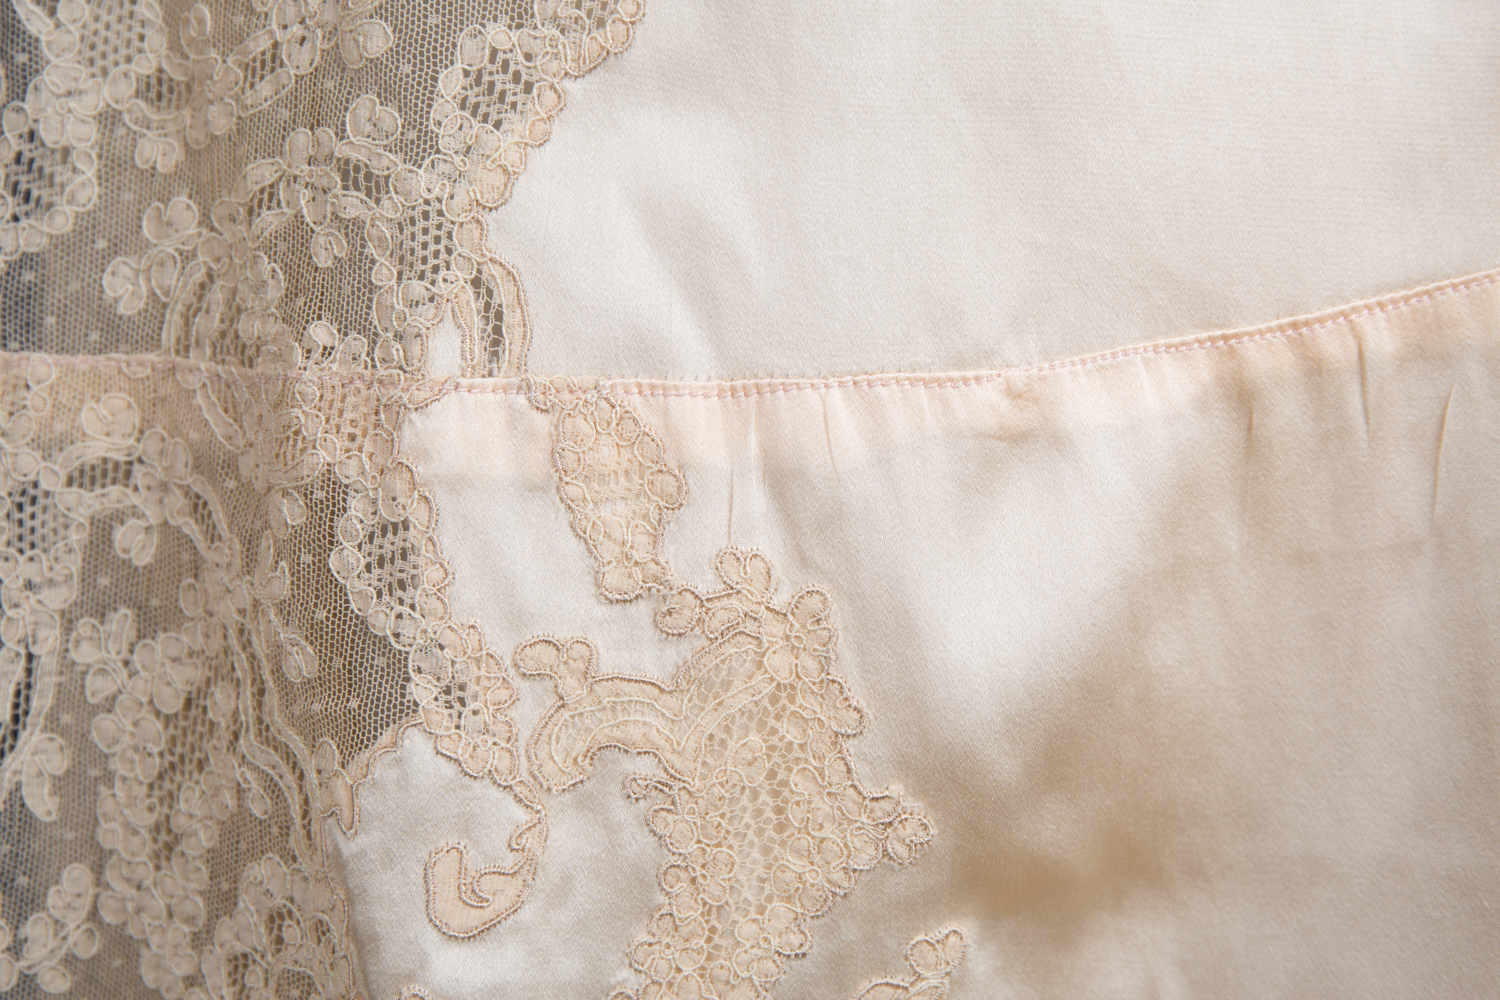 Peach Silk Satin & Corded Lace Appliquéd Peignoir, c. 1930s, USA. The Underpinnings Museum. Photography by Tigz Rice.